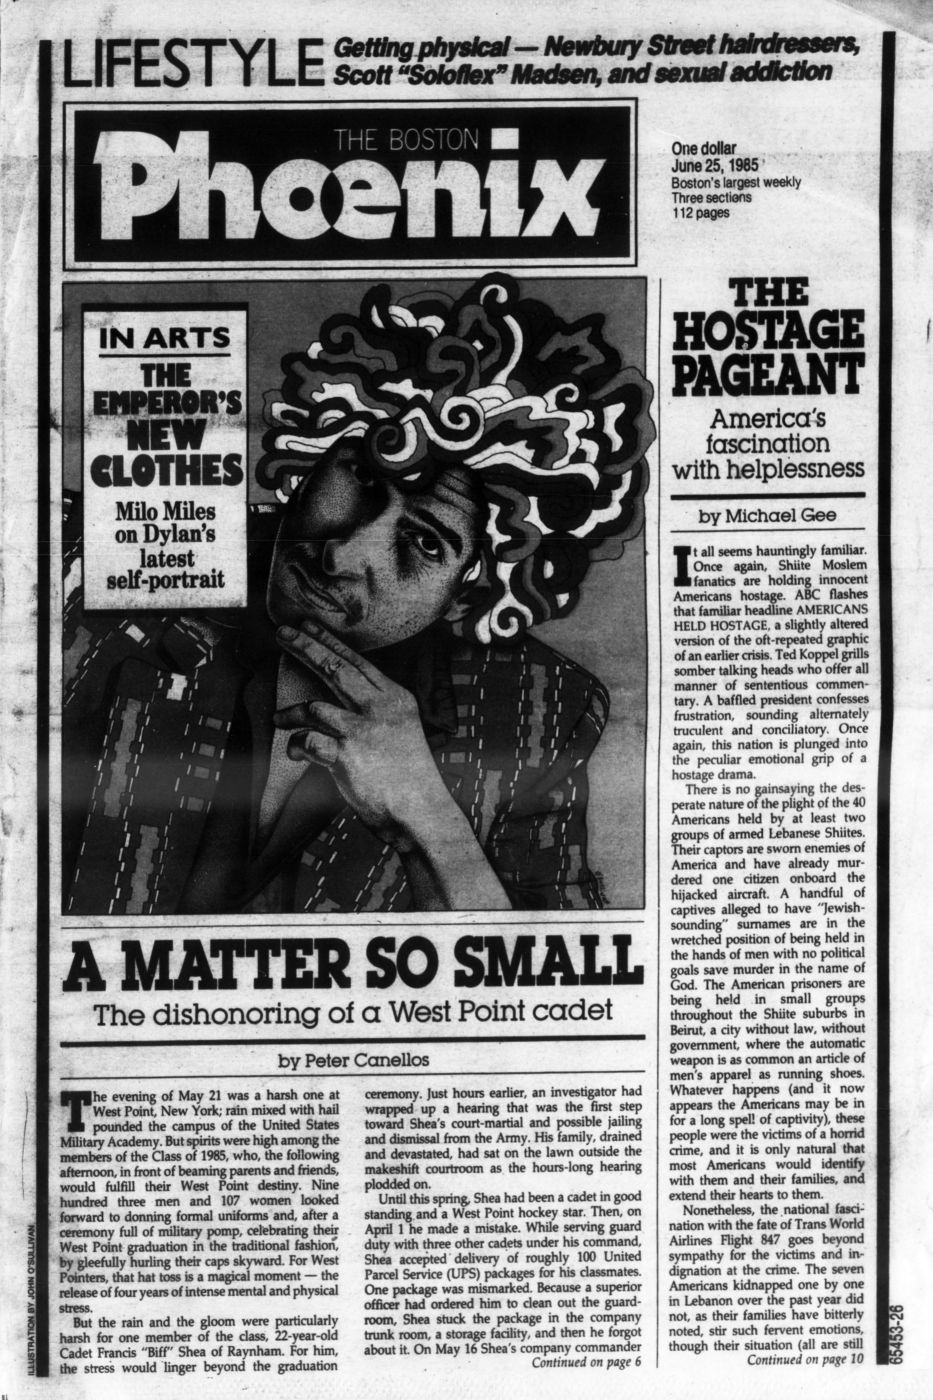 the bostonPhoenix Bob Dylan front cover